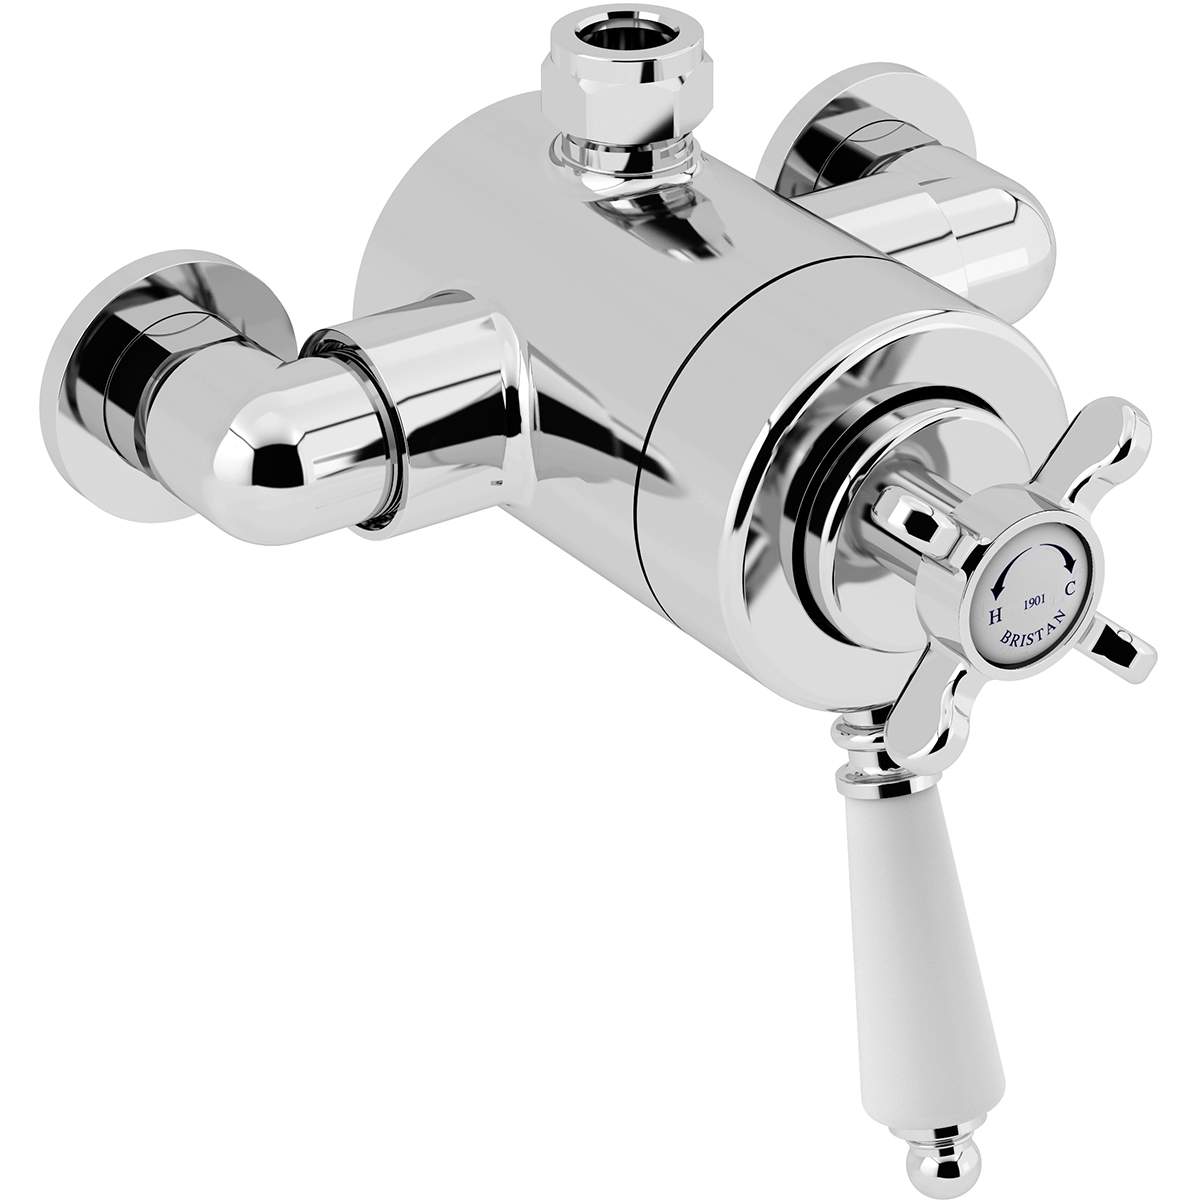 Bristan 1901 Thermostatic Exposed Dual Control Shower with Top Outlet (N2 CSHXTVO C)